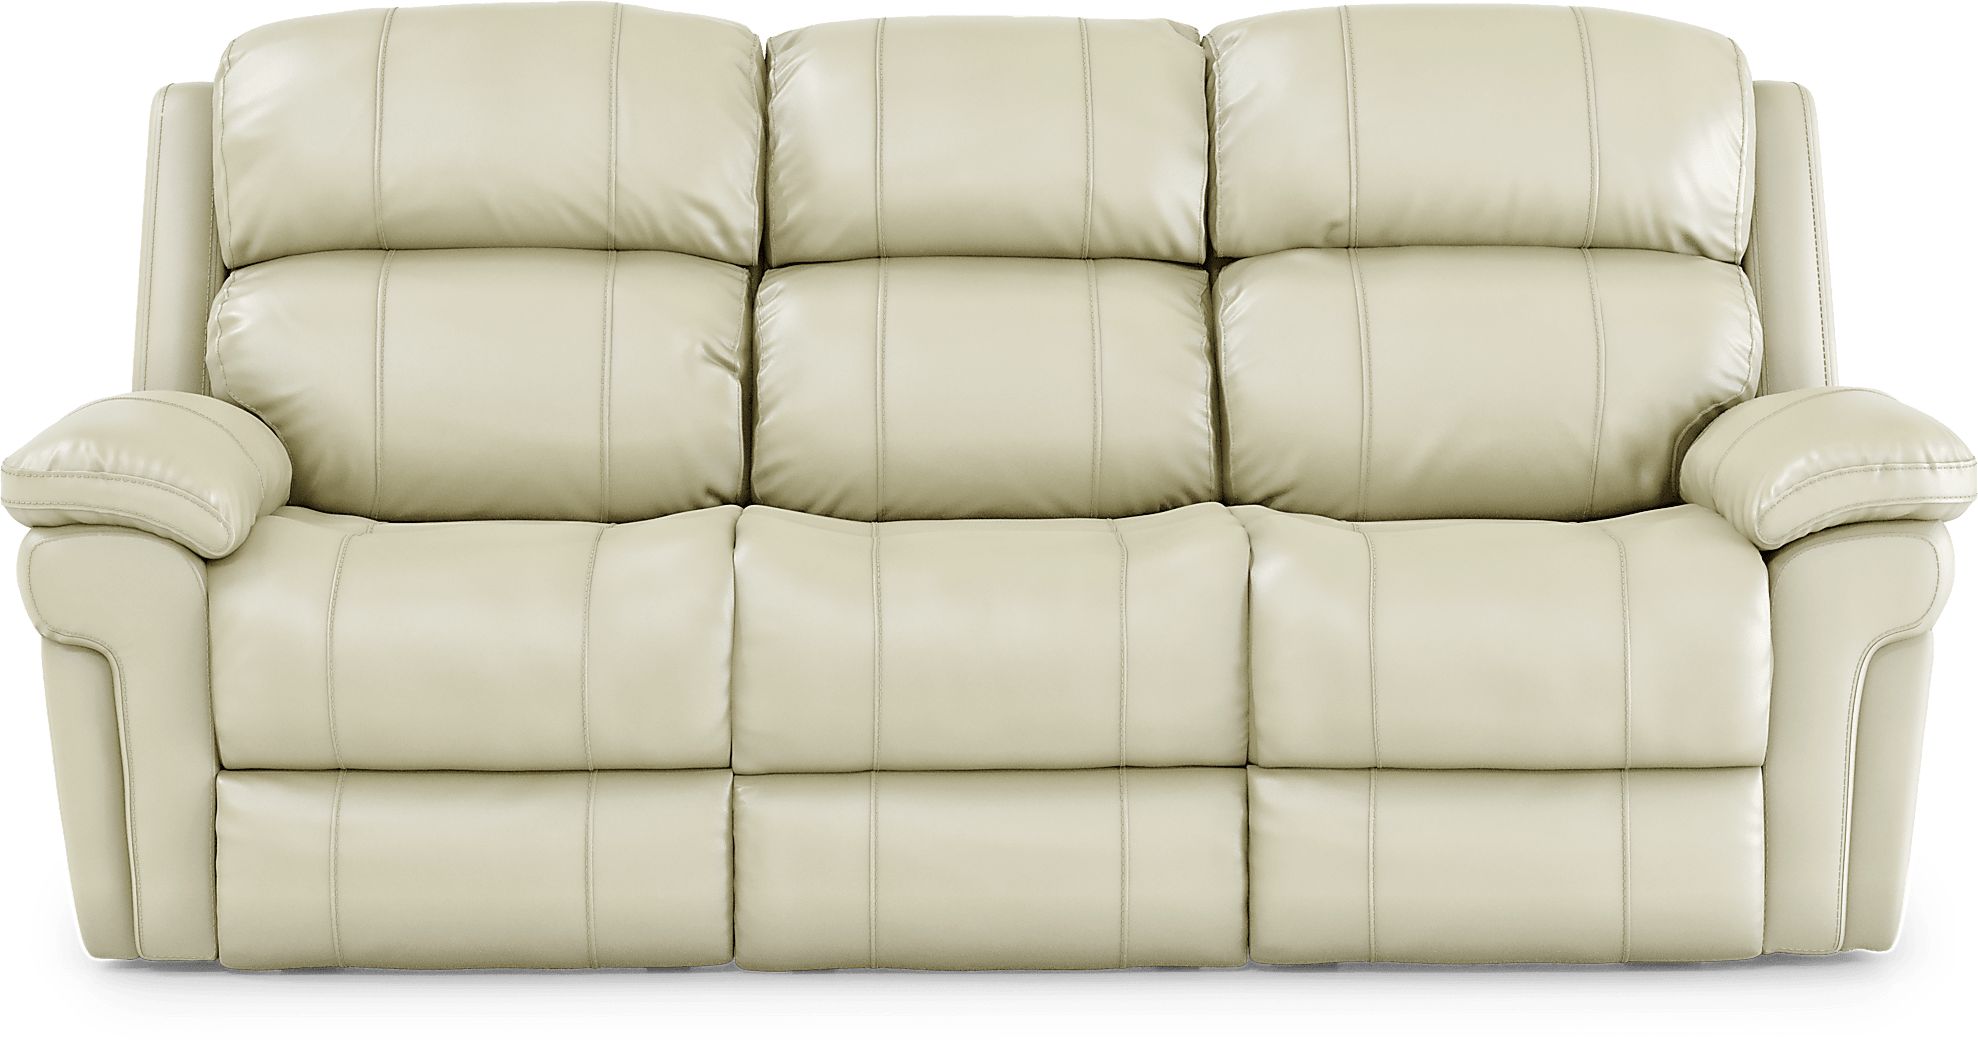 Trevino Place Cream Leather 3 Pc Living Room with Reclining Sofa